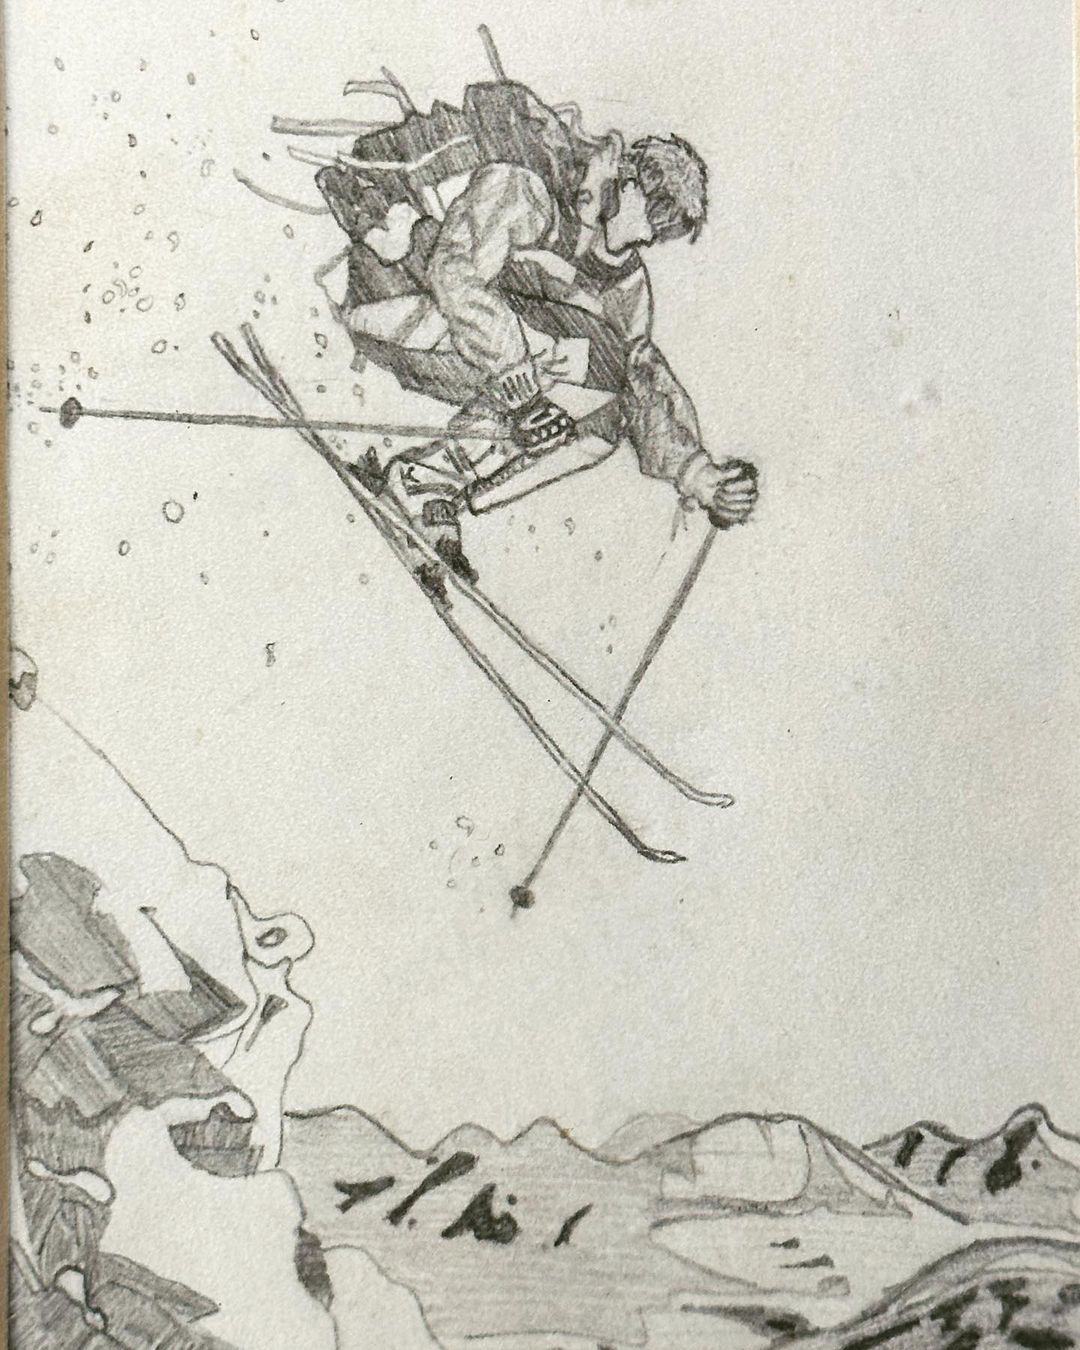 "Skiing steeps." Pencil on paper. 1990s